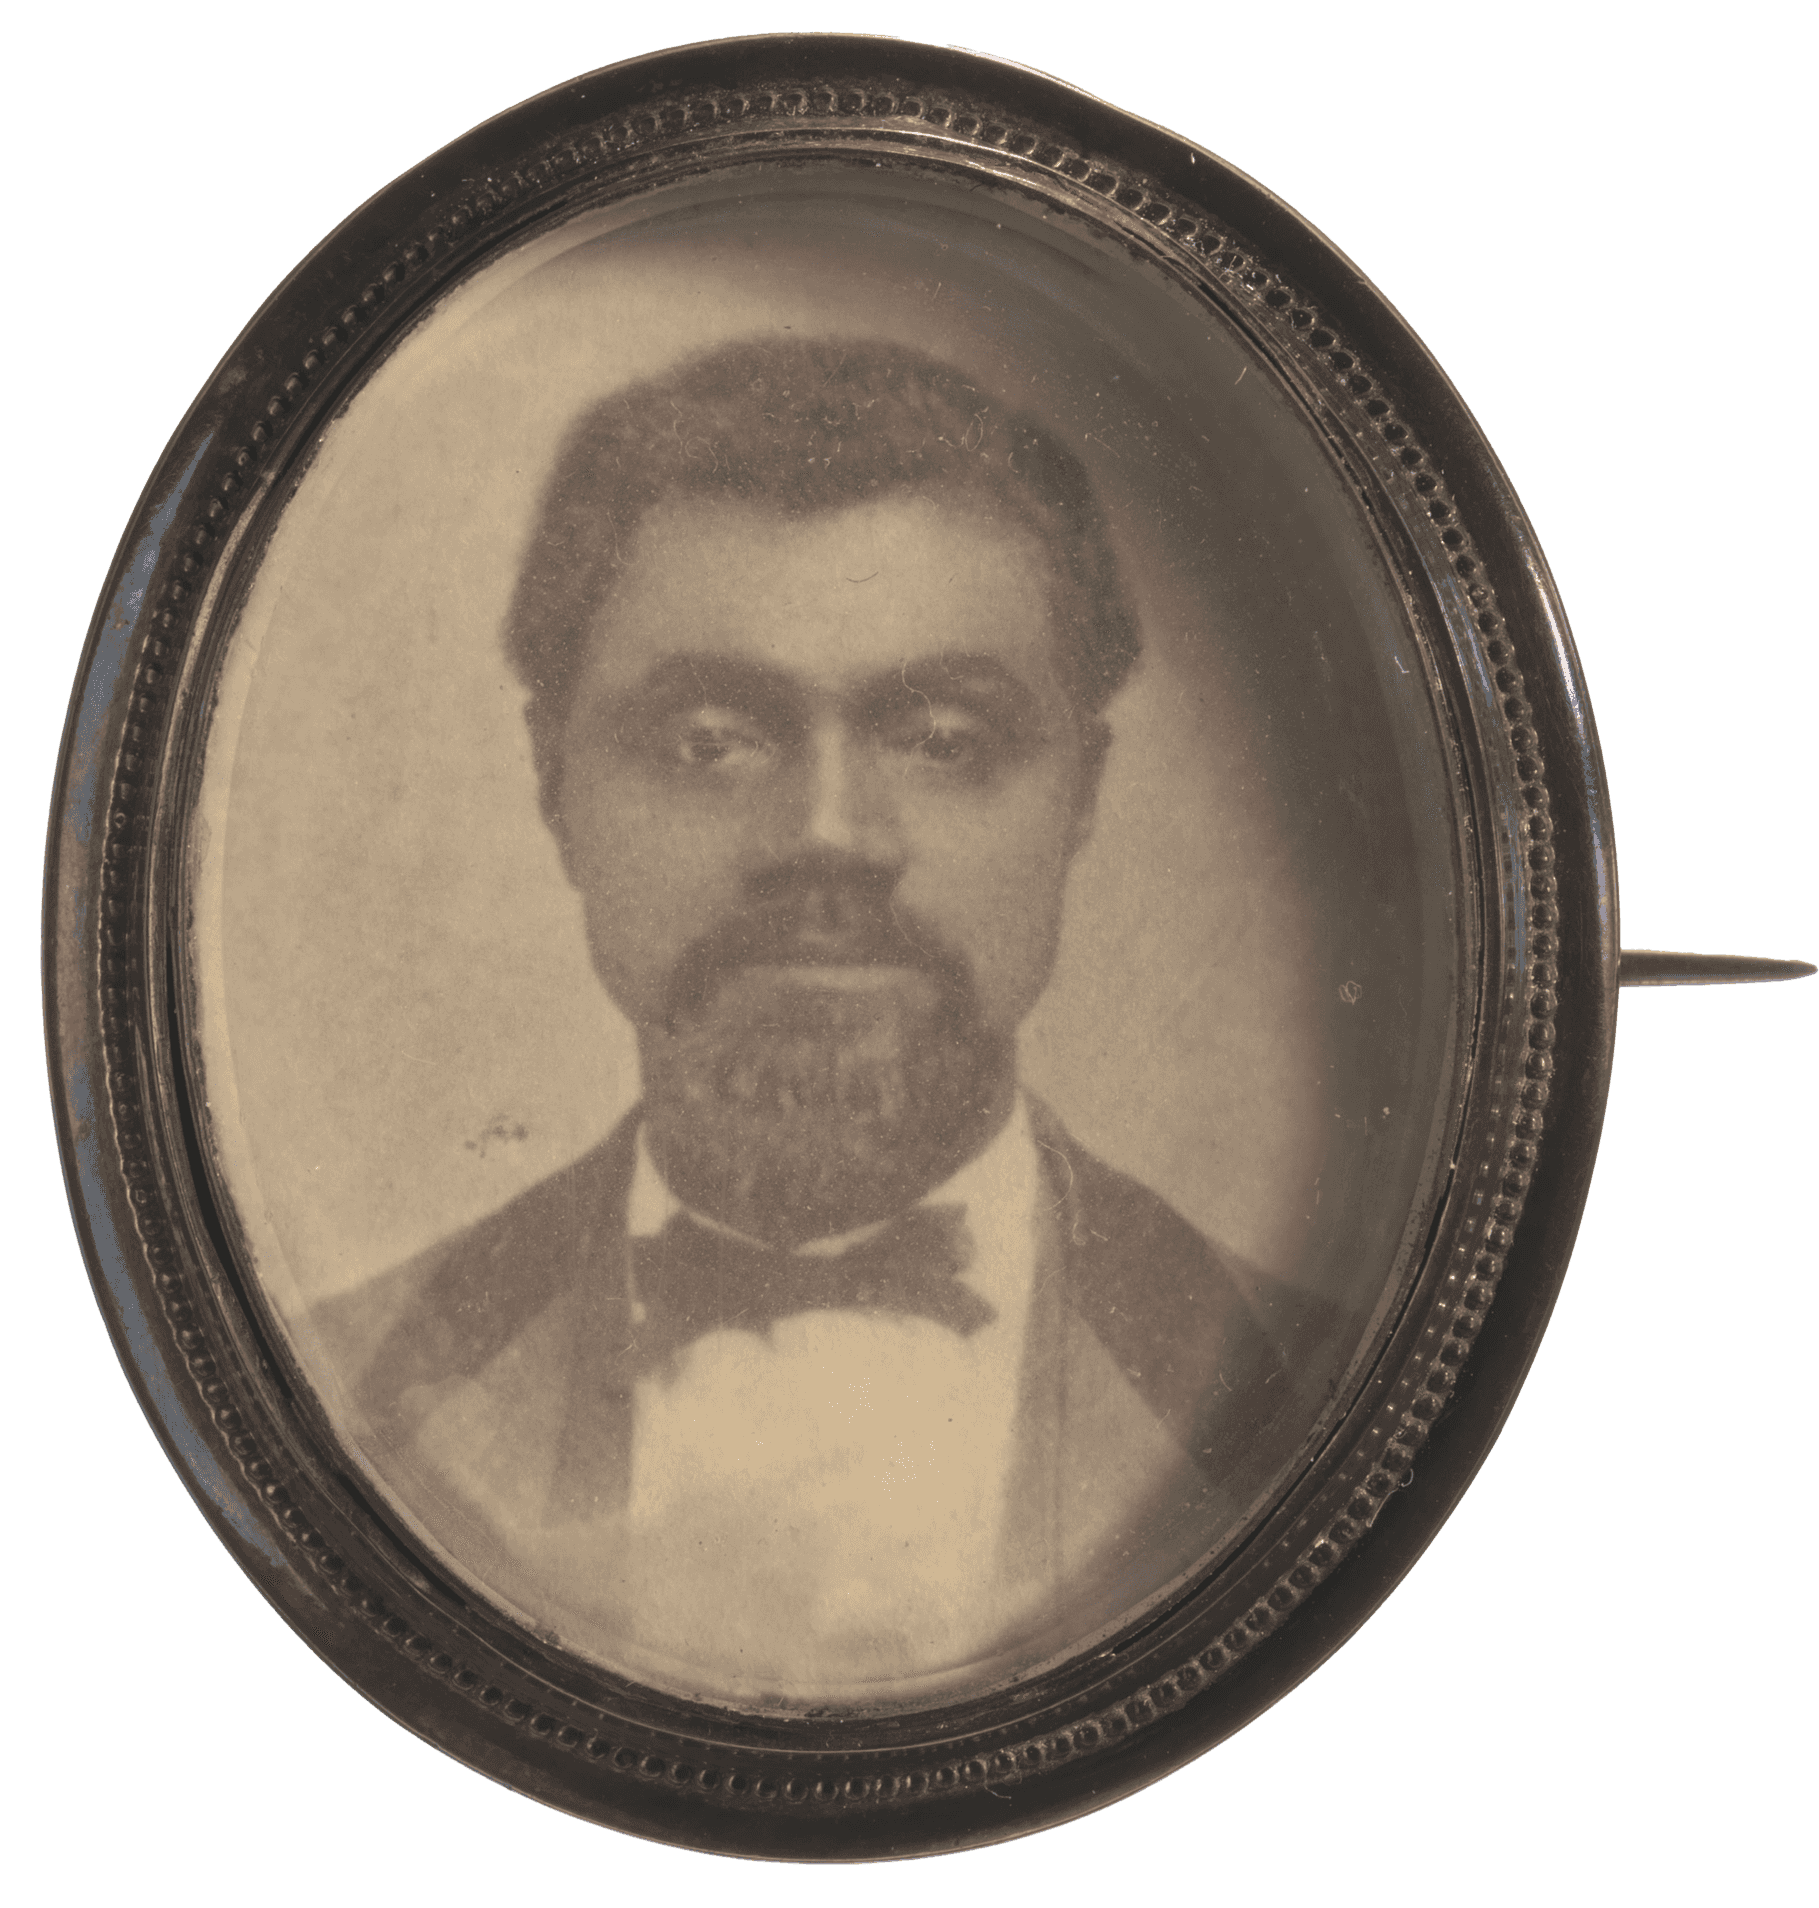 A metal pin back button featuring a photographic image of Sen. W.B. Nash. The pin is oval and made of metal with a slight tarnish. The front features a beaded design around the edge of the picture and the back is slightly indented with a horizontal pin across the middle. The photo is placed loosely in the frame and features a bust shot of Nash wearing a suit jacket and tie. He has a beard and mustache.